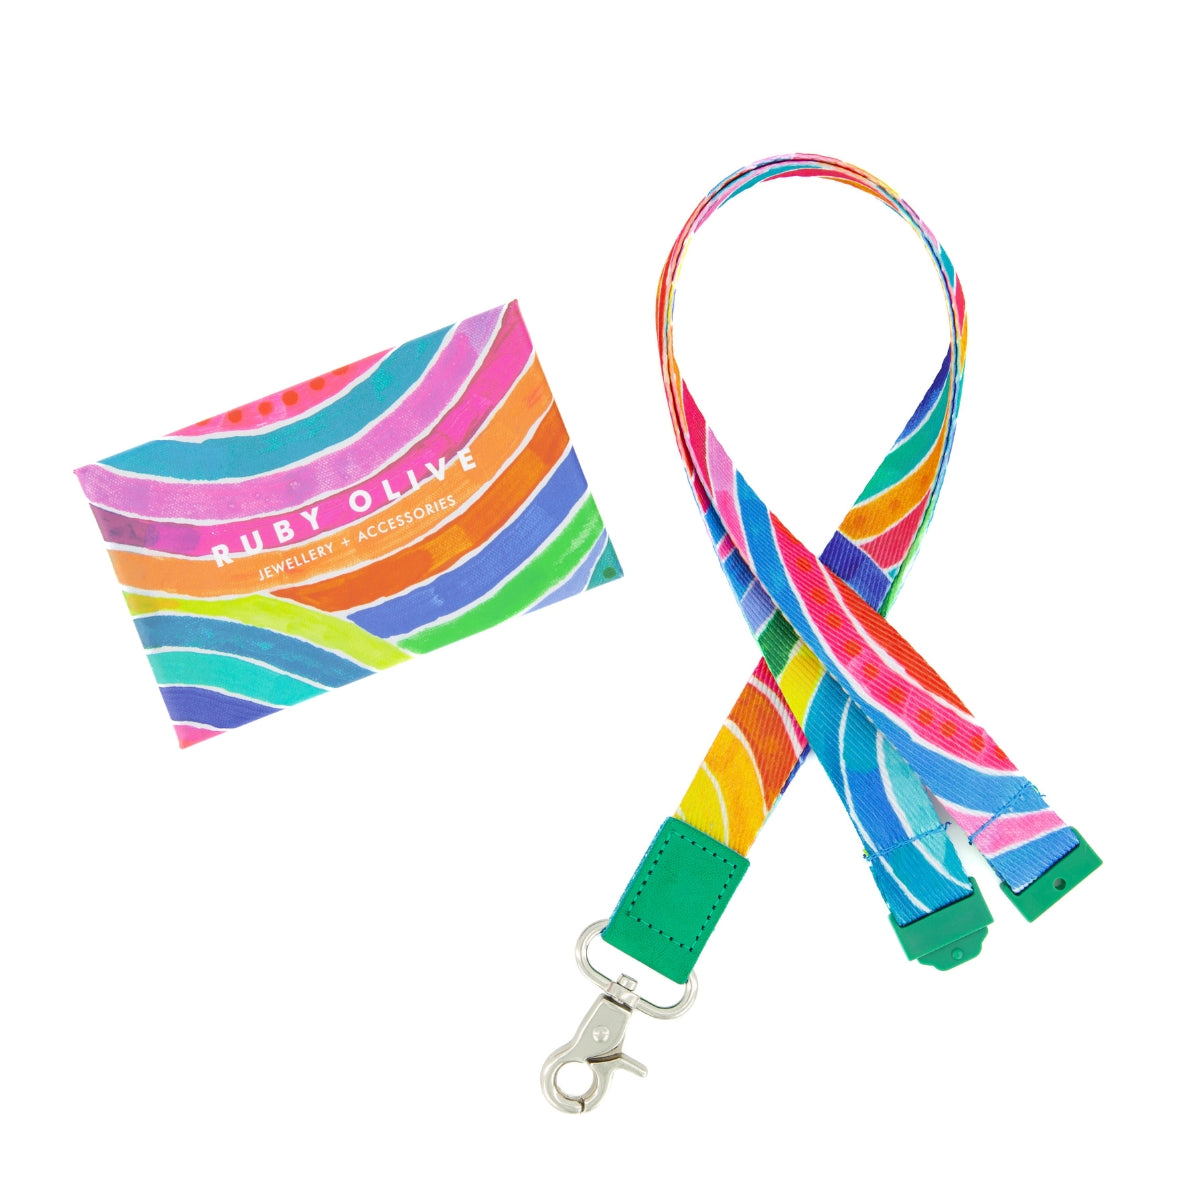 RO x Lordy Dordie Rainbow Lanyard (3 Colours With Safety Clasp Option)